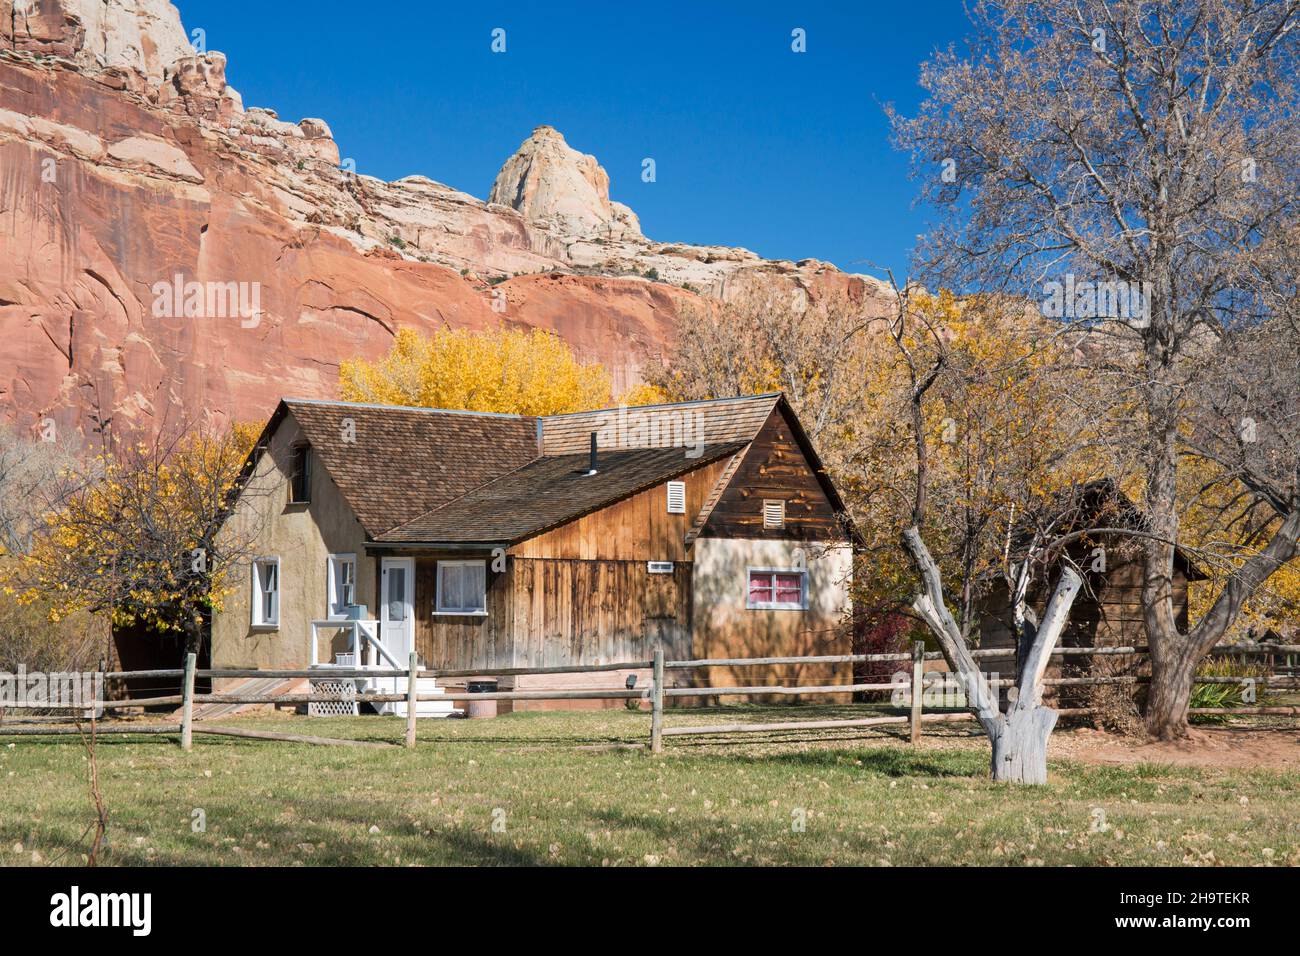 Fruita, Capitol Reef National Park, Utah, USA. Gifford House, part of the historic Gifford Homestead, autumn, cliffs of the Waterpocket Fold beyond. Stock Photo